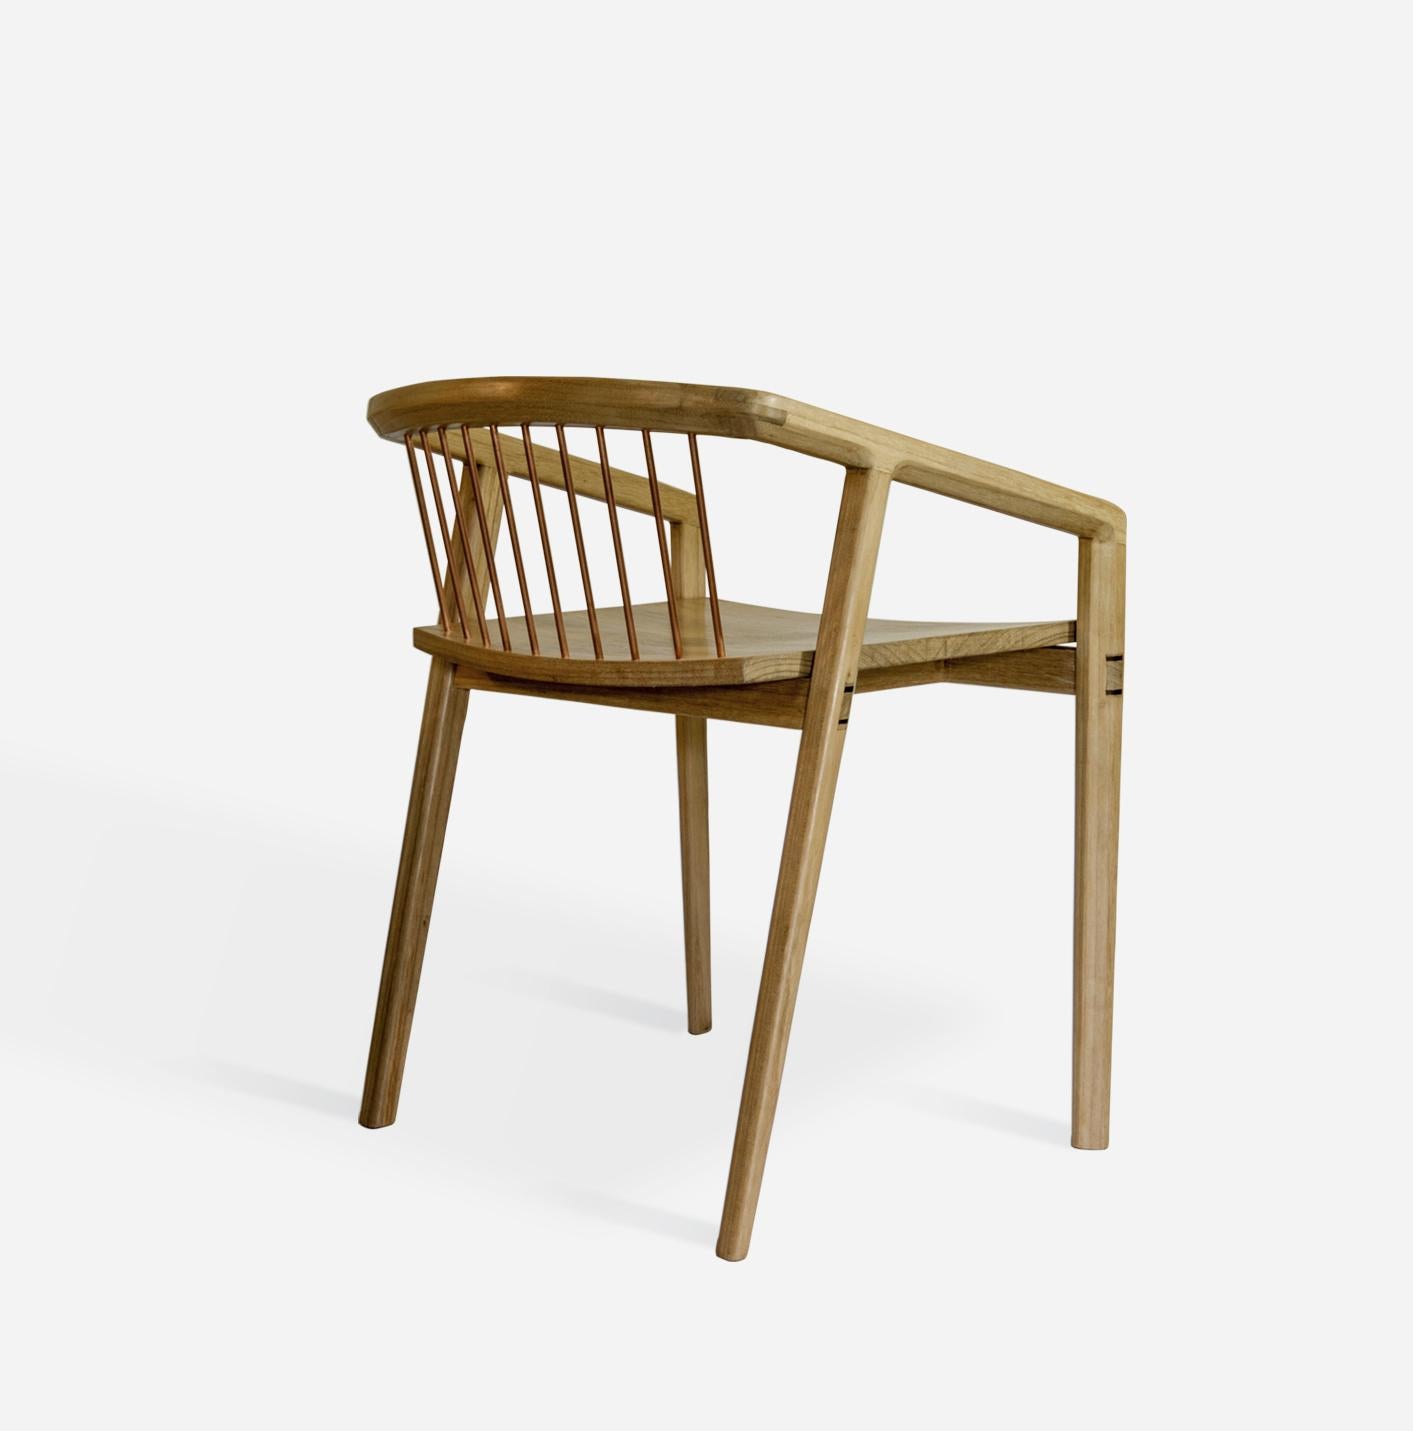 Canelinha Contemporary Chair in Brazilian Hardwood by Knót Artesanal In New Condition For Sale In Paraty, Rio de Janeiro